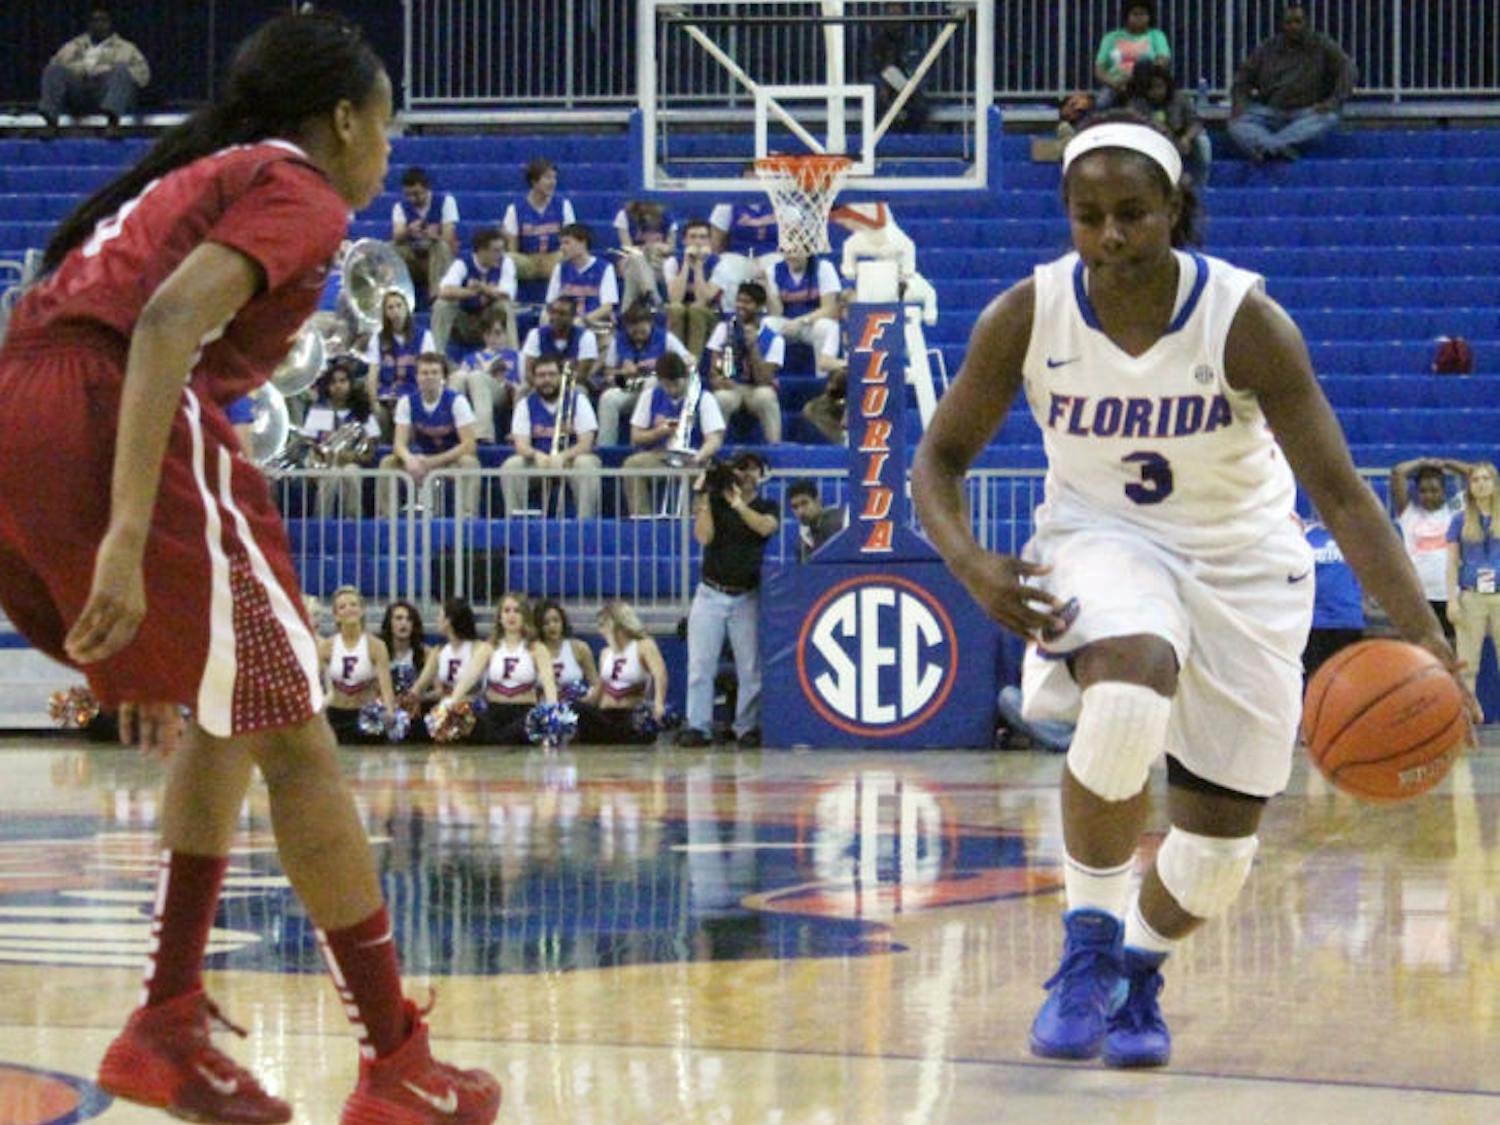 January Miller drives down the court in Florida’s 75-67 win against Alabama on Jan. 30 in the O’Connell Center. Miller fouled out against Georgia on Sunday.